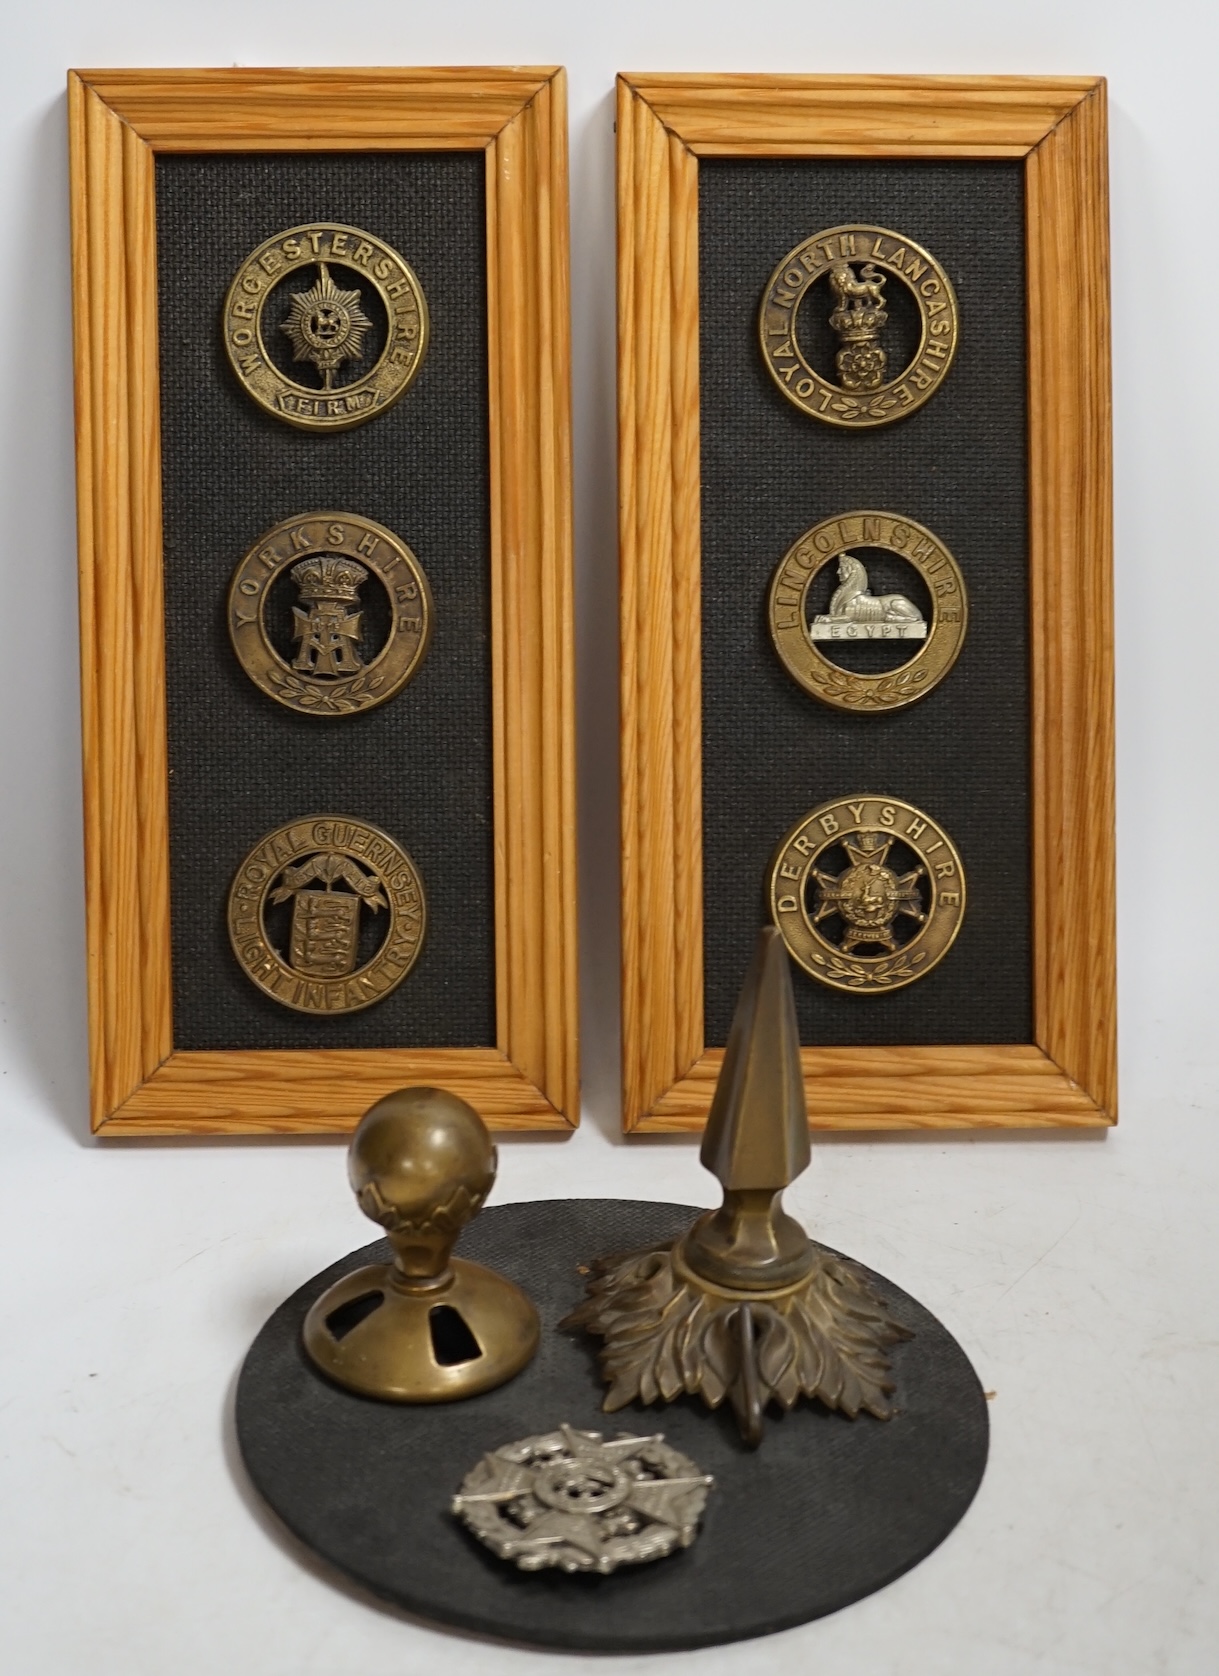 Six military helmet plates mounted on two boards, together with two helmet spikes and a cap badge, including; the Yorkshire Regiment, the Royal Guernsey Light Infantry, the Loyal North Lancashire, the Lincolnshire Regime